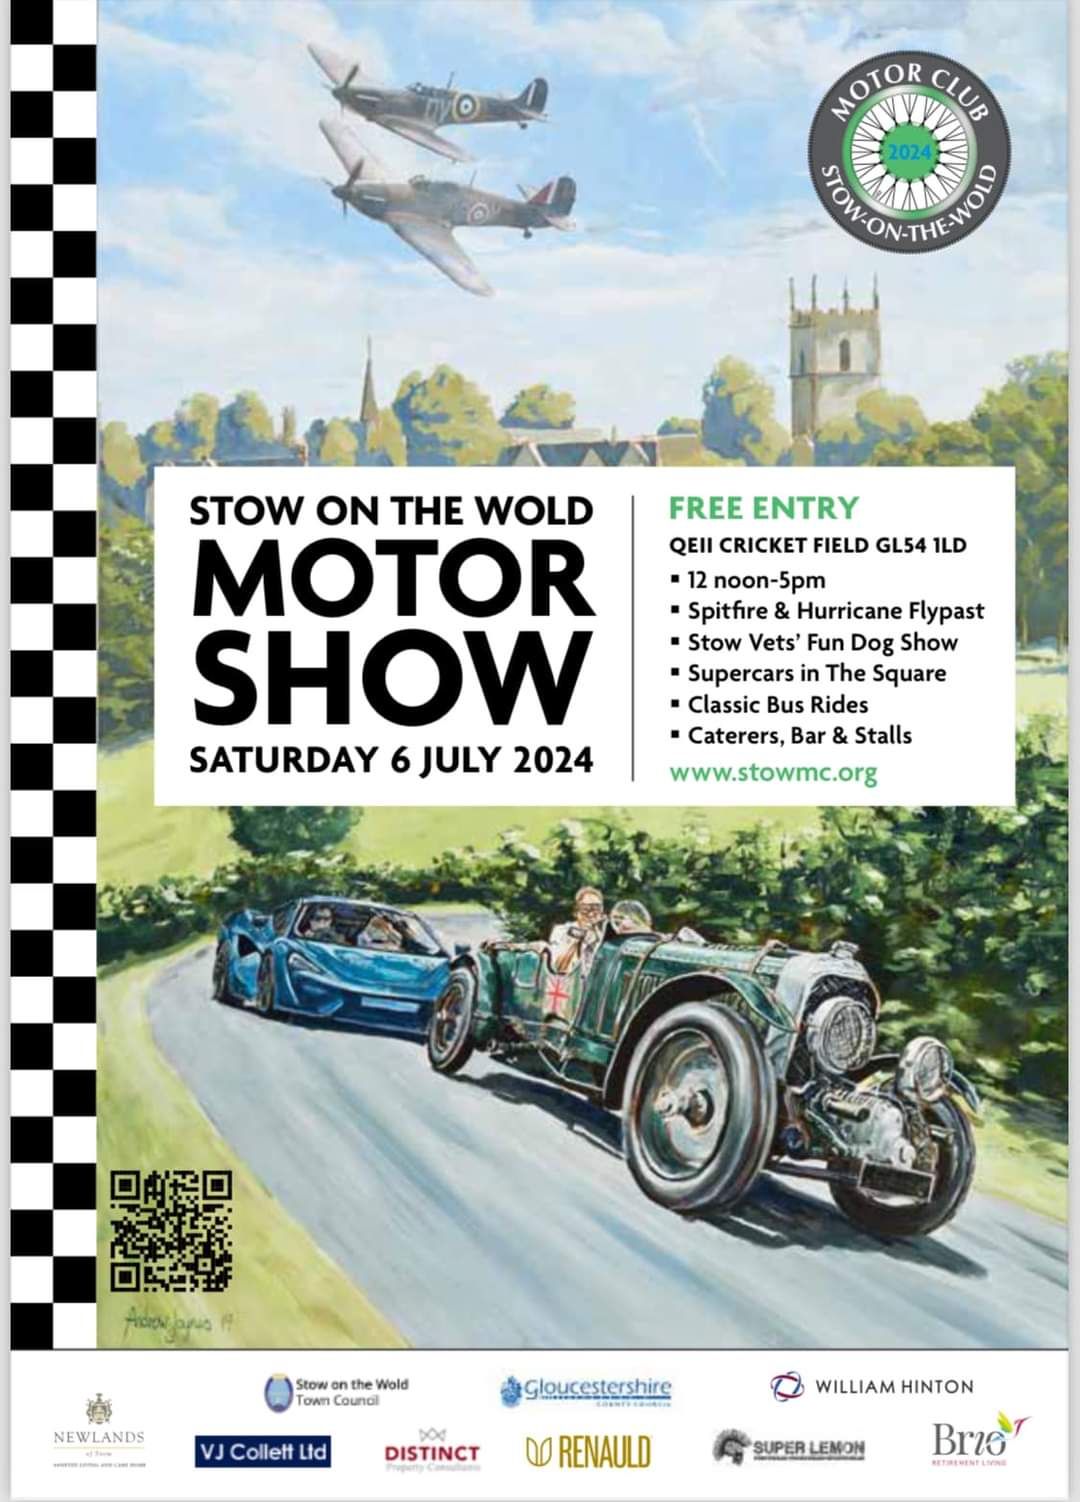 Stow-on-the-Wold Motor Show